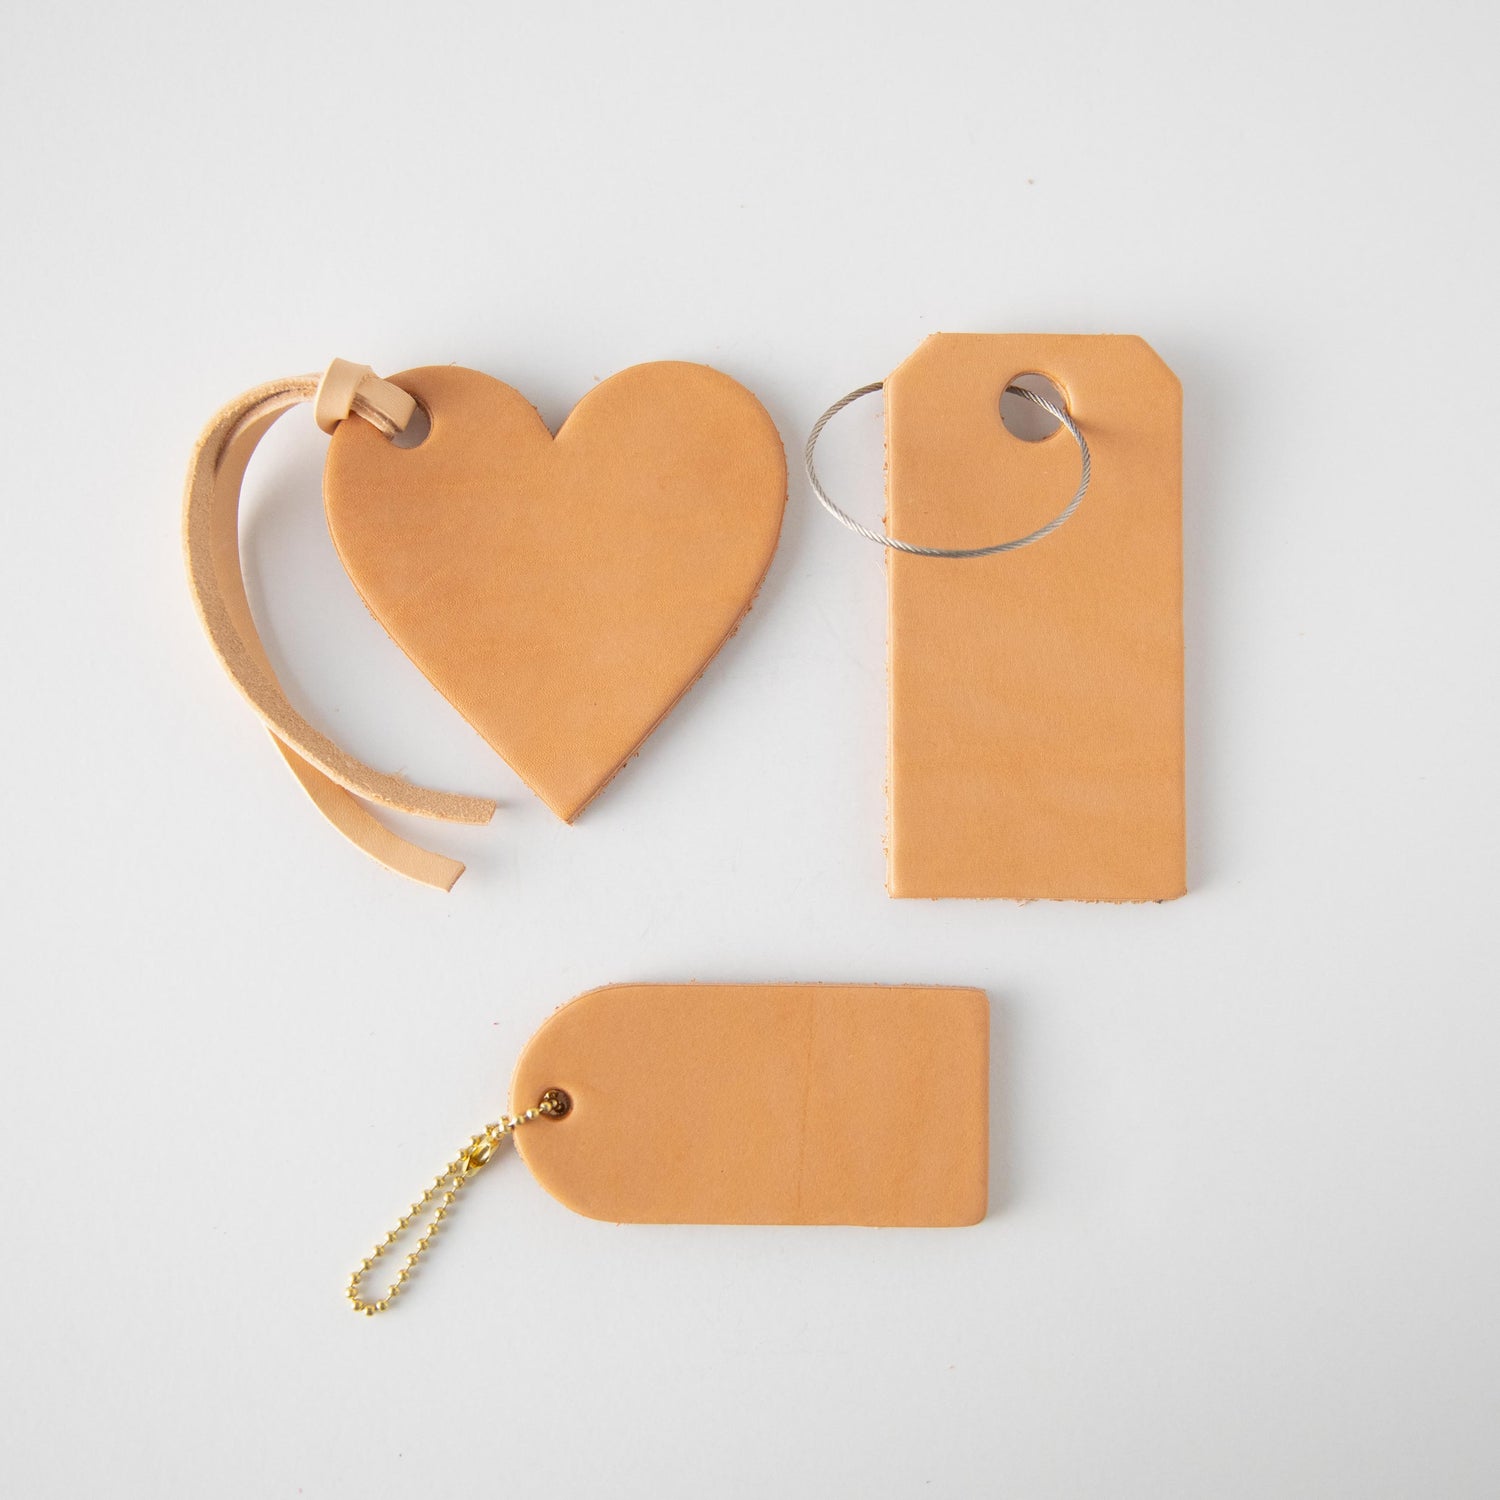 Vegetable Tanned Leather Tag- personalized luggage tags - custom luggage tags - KMM &amp; Co.